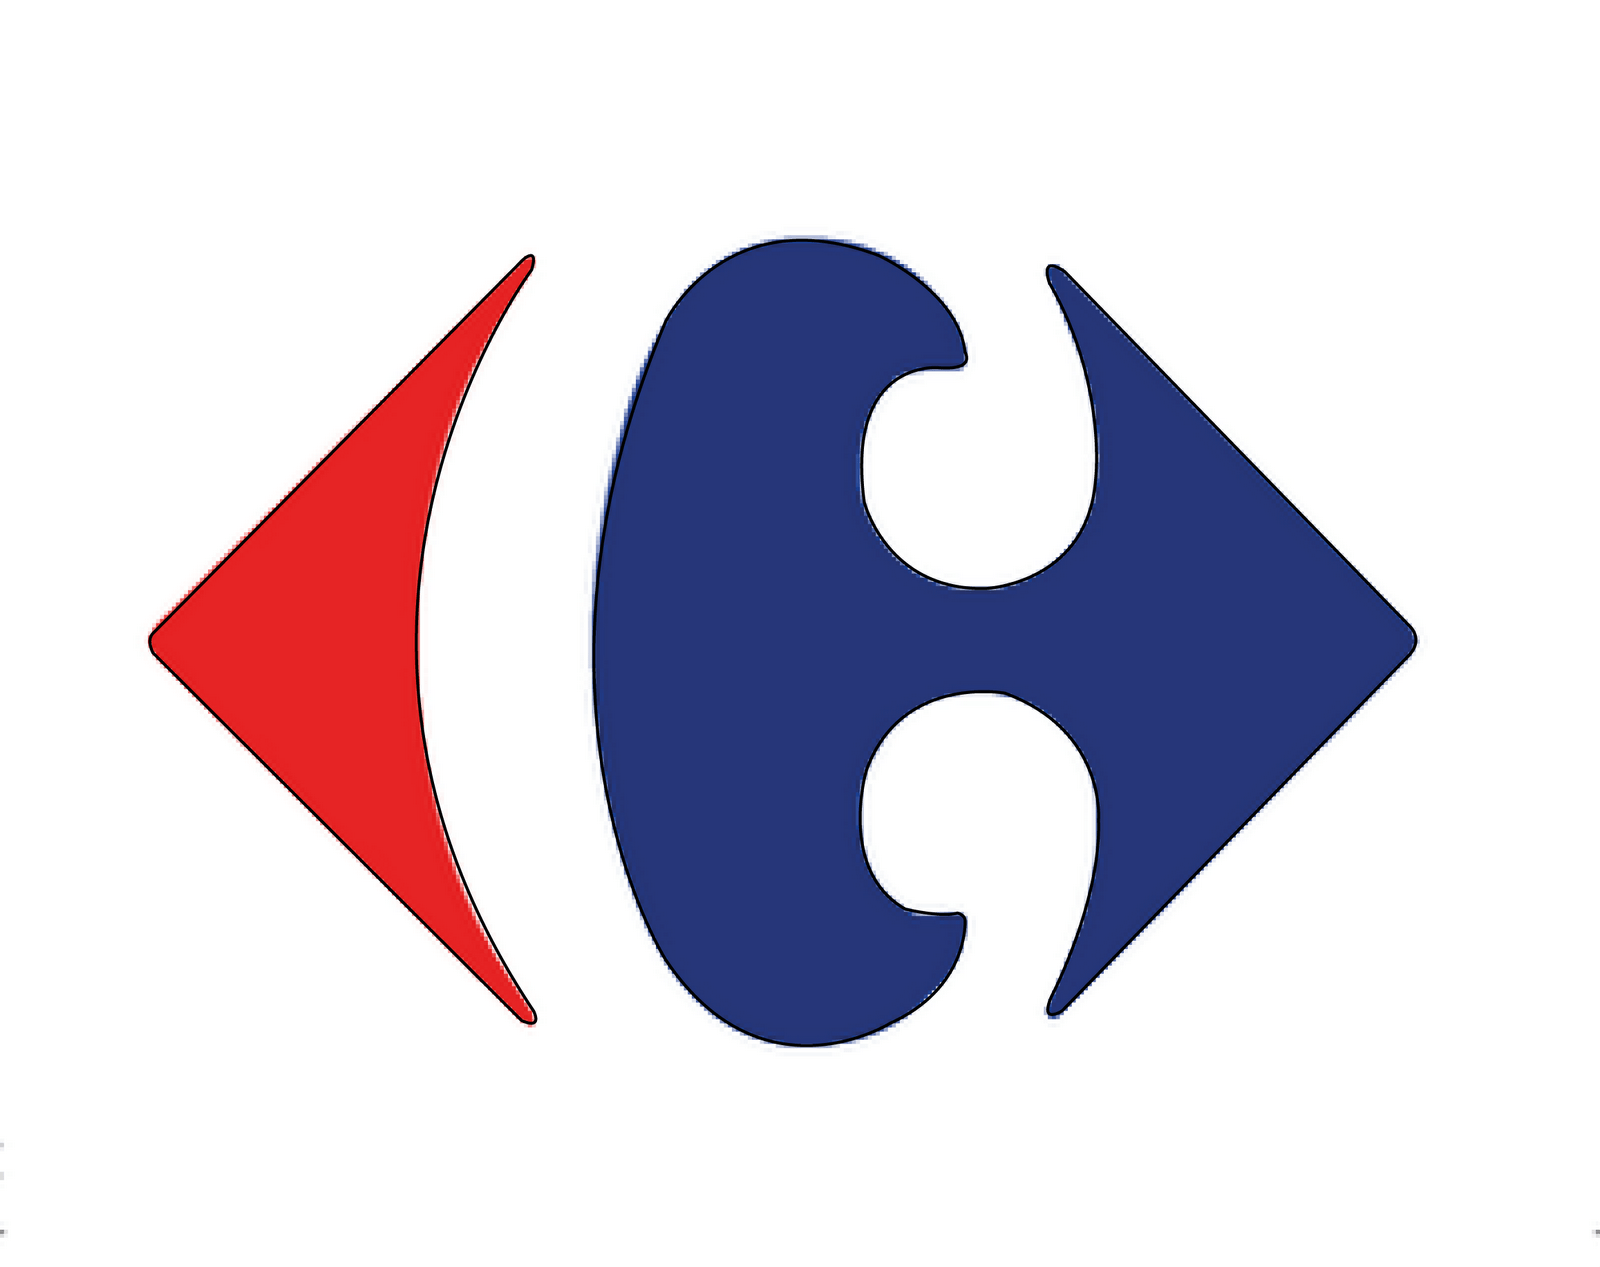 Who Has a Red and Blue C Logo - Red and blue Logos